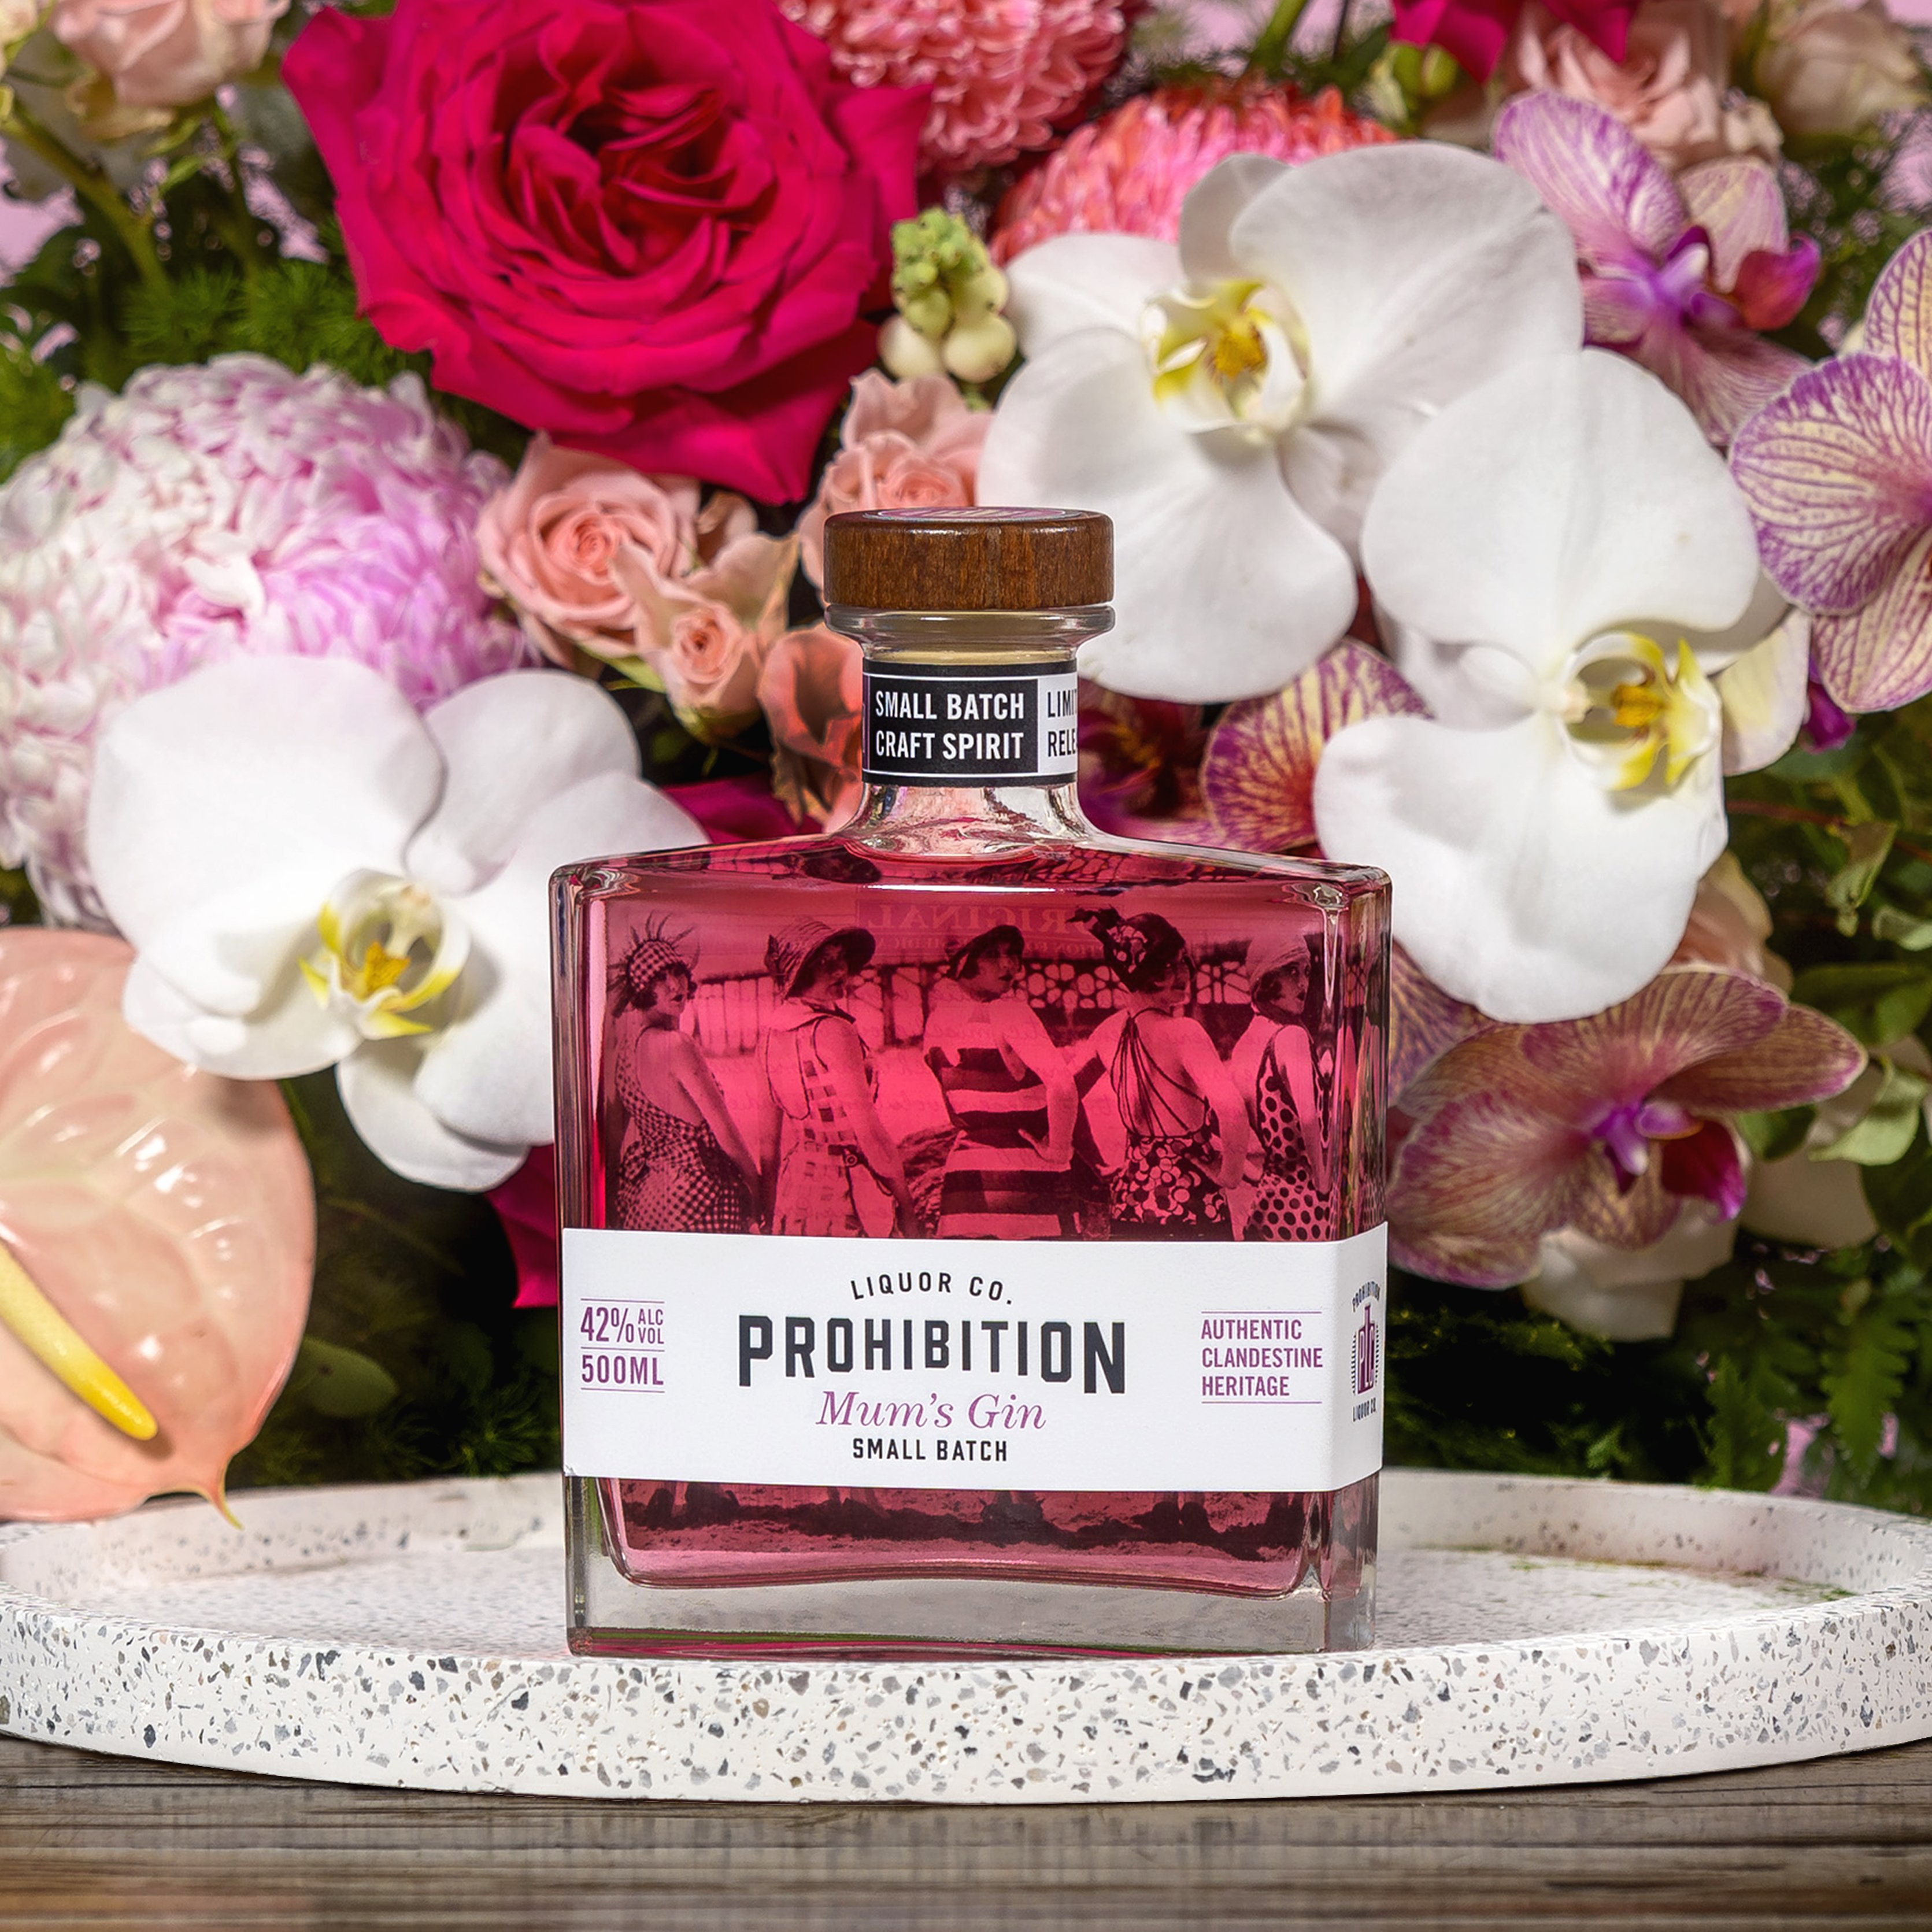 Prohibition Mum's Gin now in stock - get yours in time for Mothers Day!